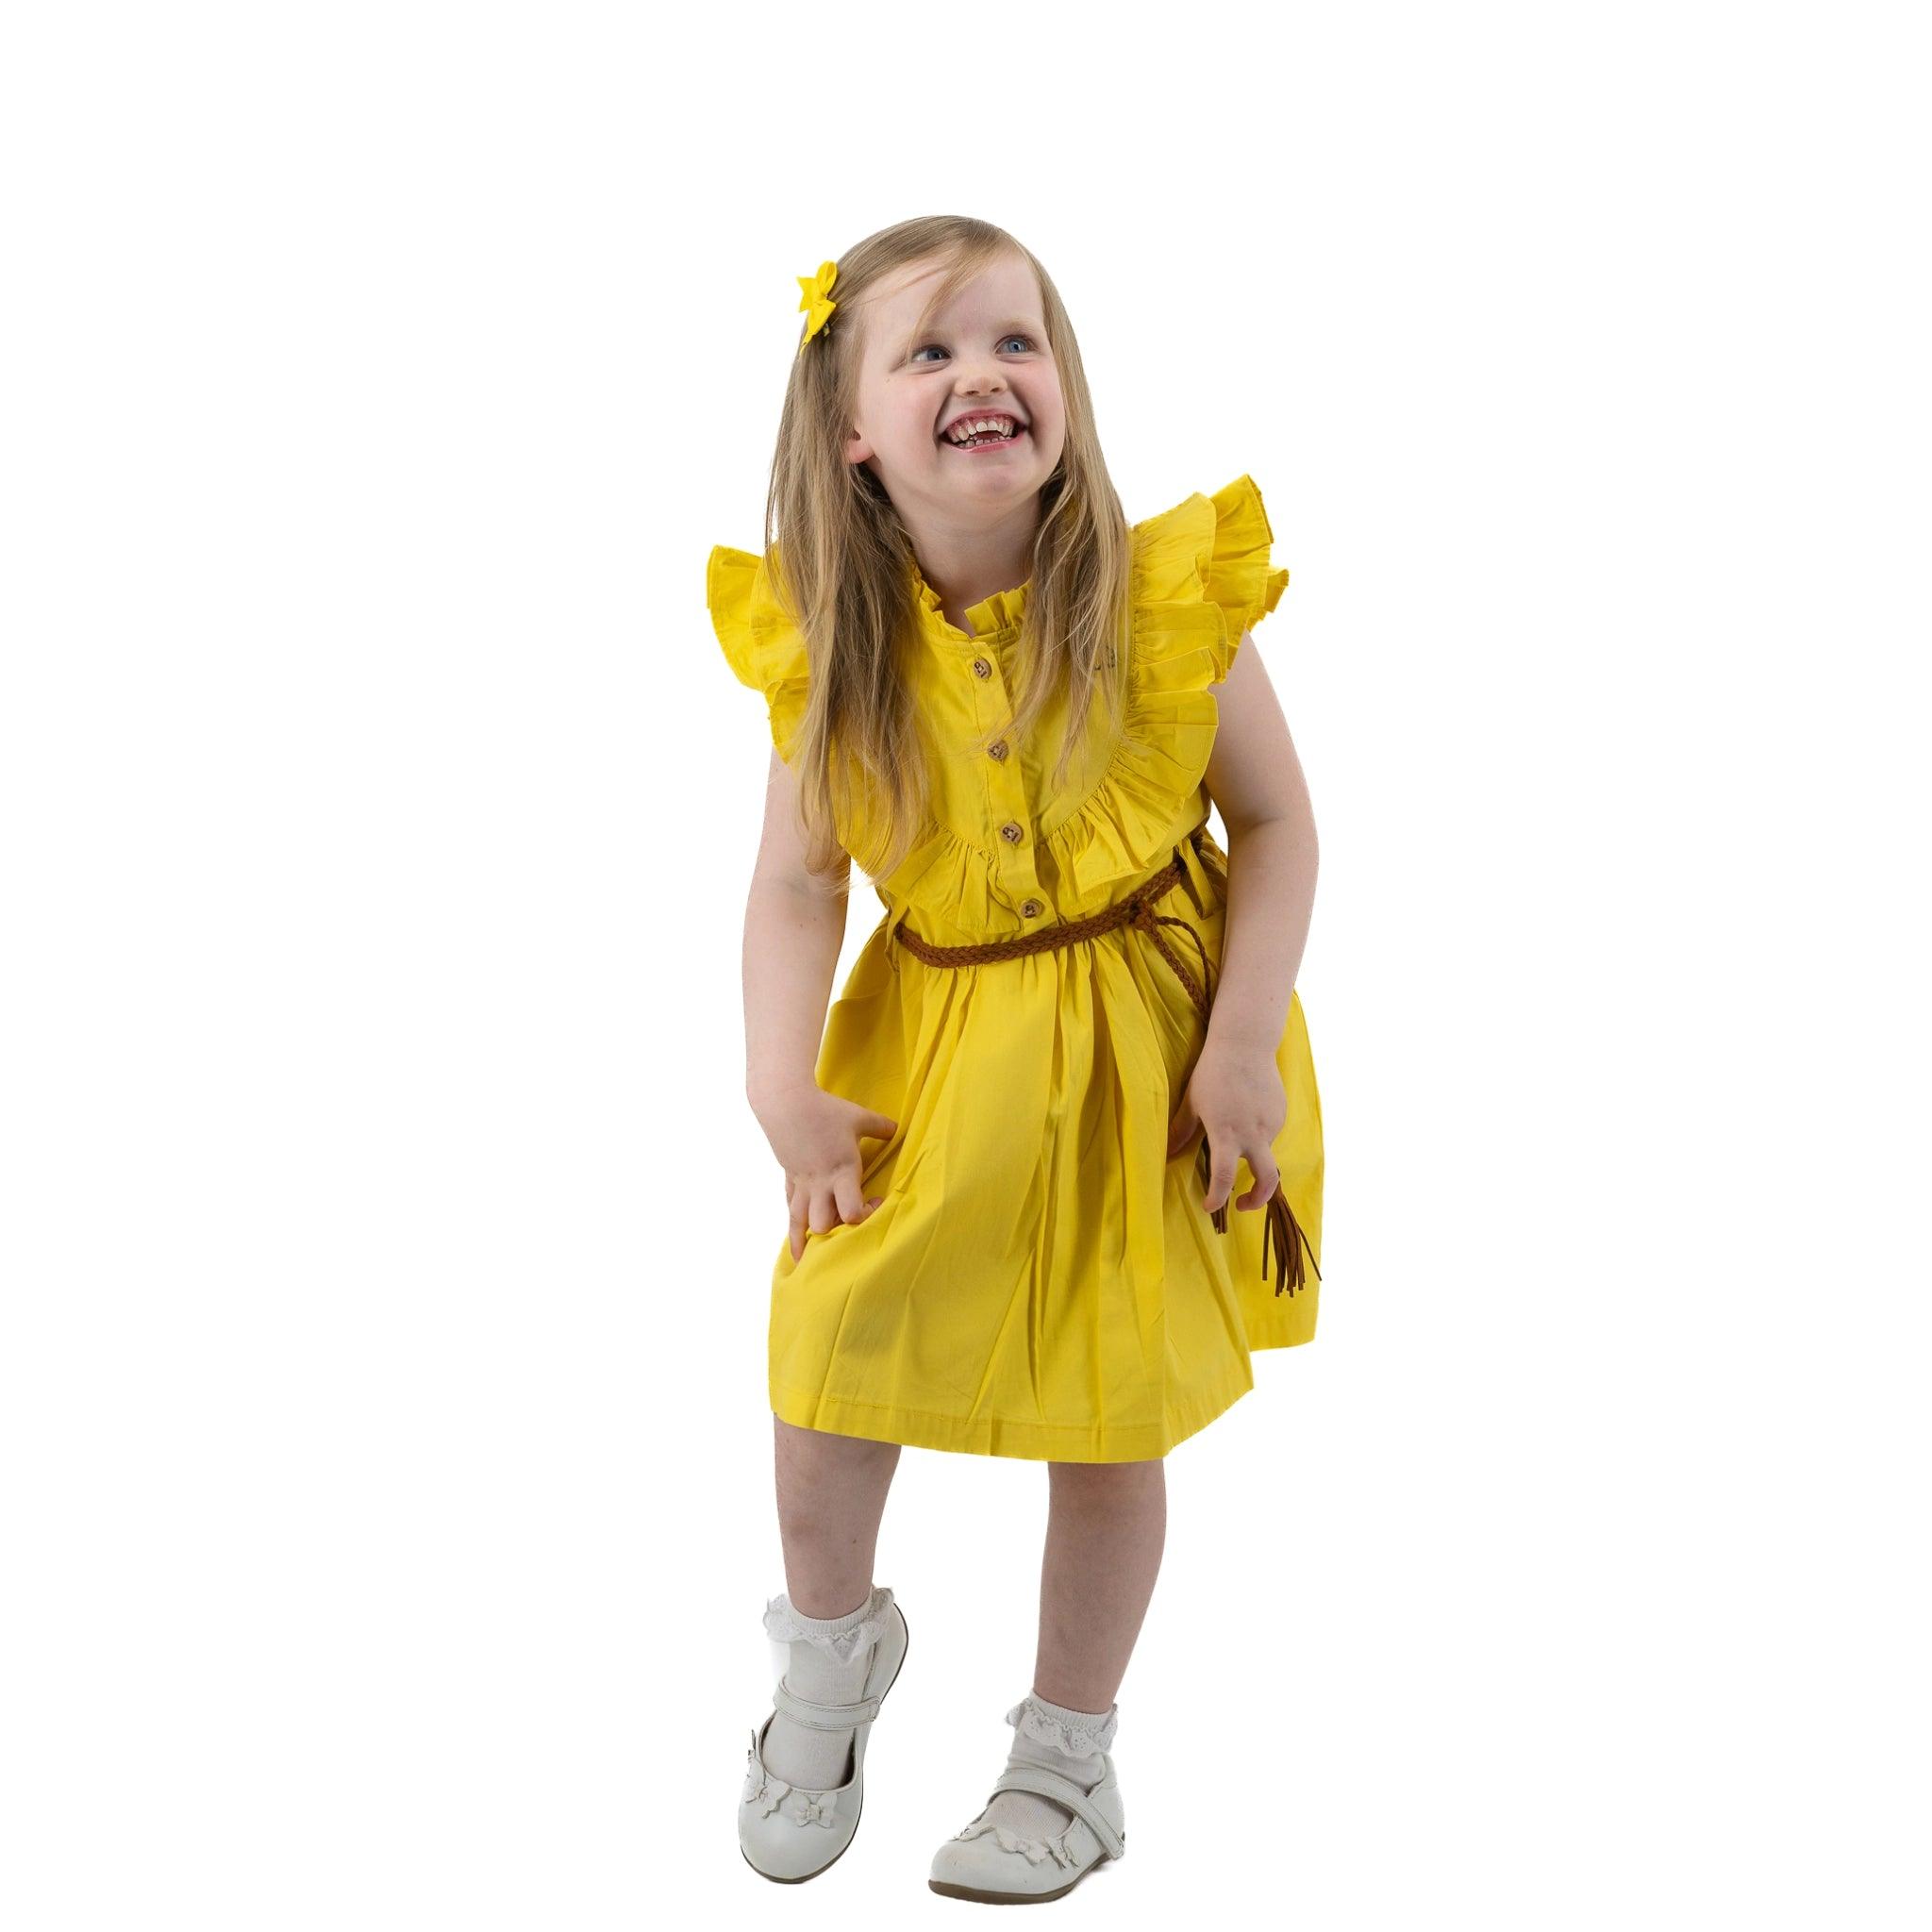 A young girl in a Karee yellow butterfly sleeve cotton dress and white shoes smiles joyfully, looking upwards, isolated on a white background.